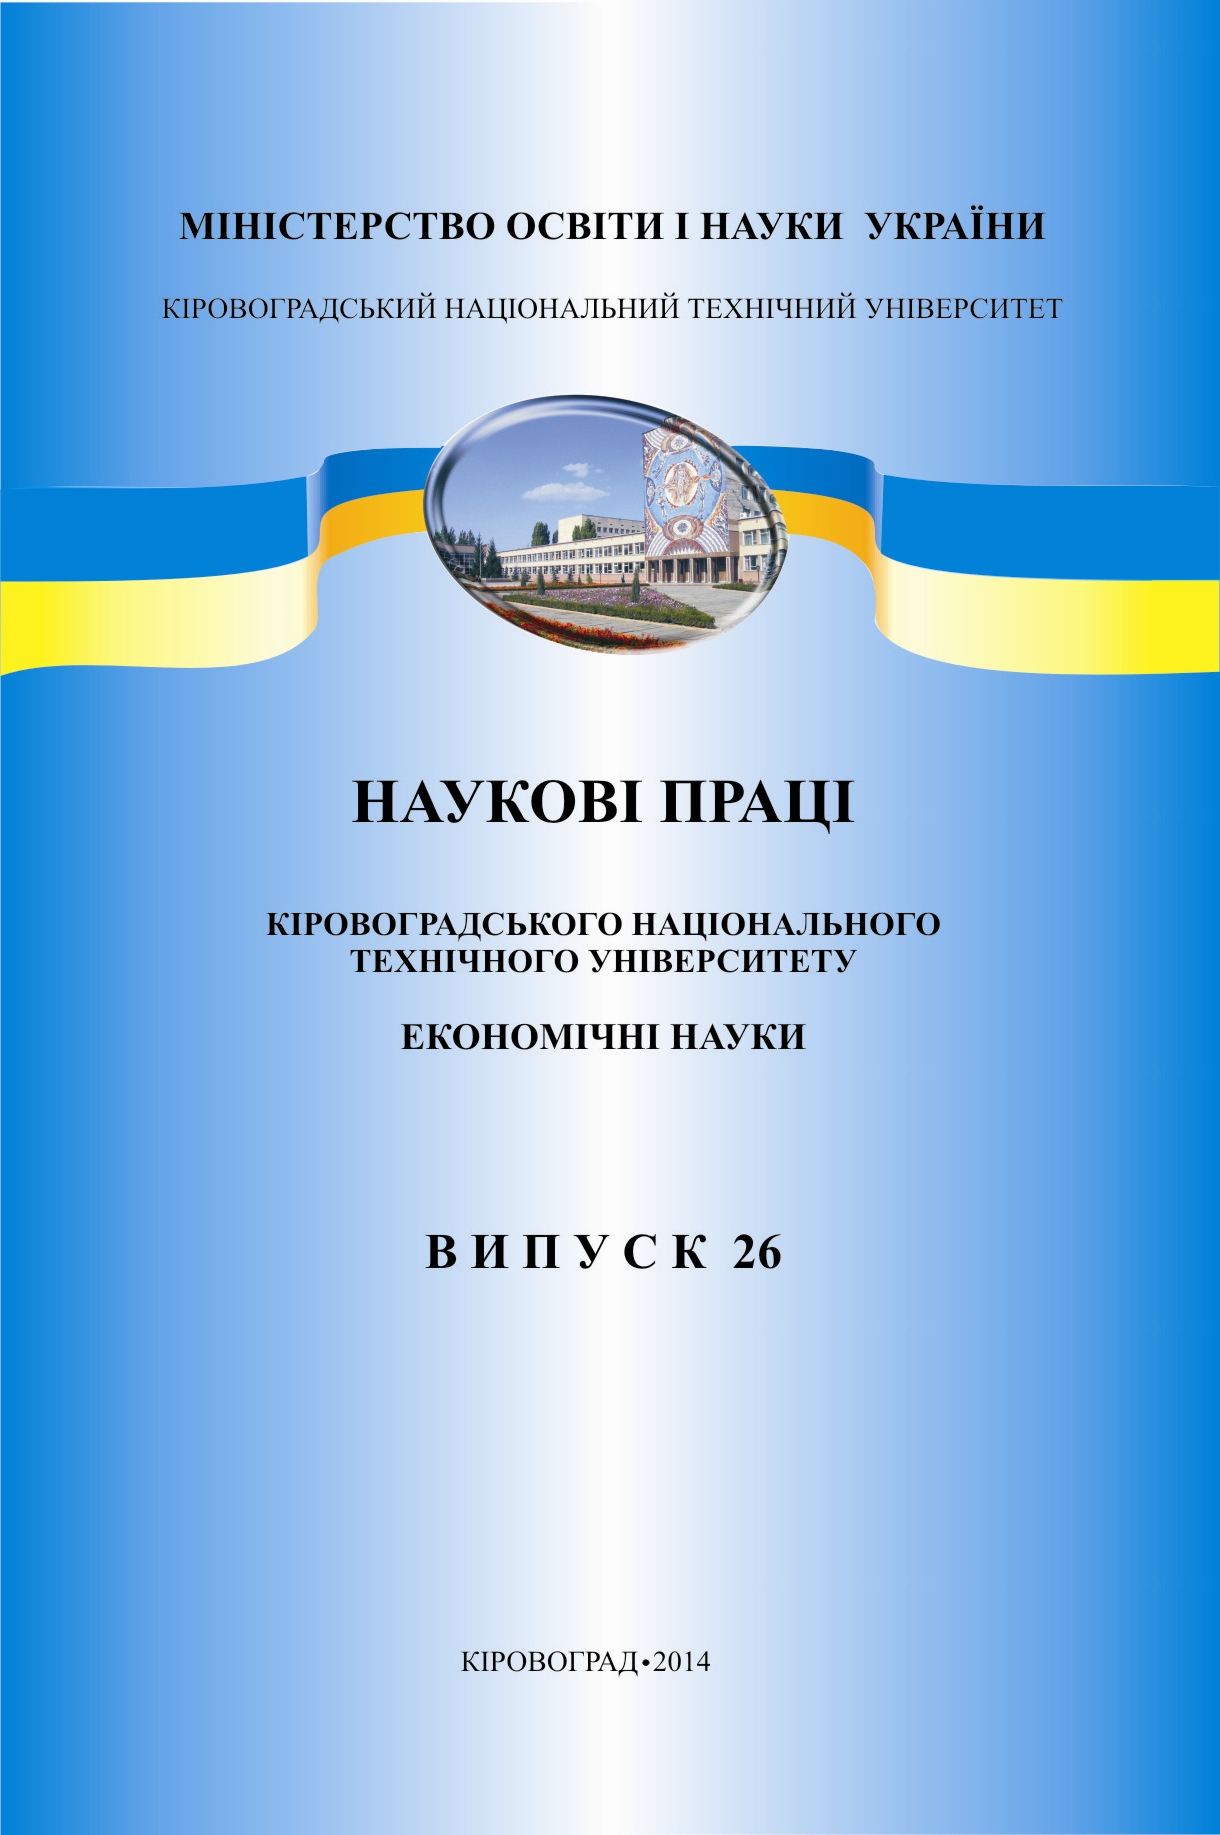 The Duty for a Parking of Vehicles in the System of Local Taxes and Duties of Ukraine Cover Image